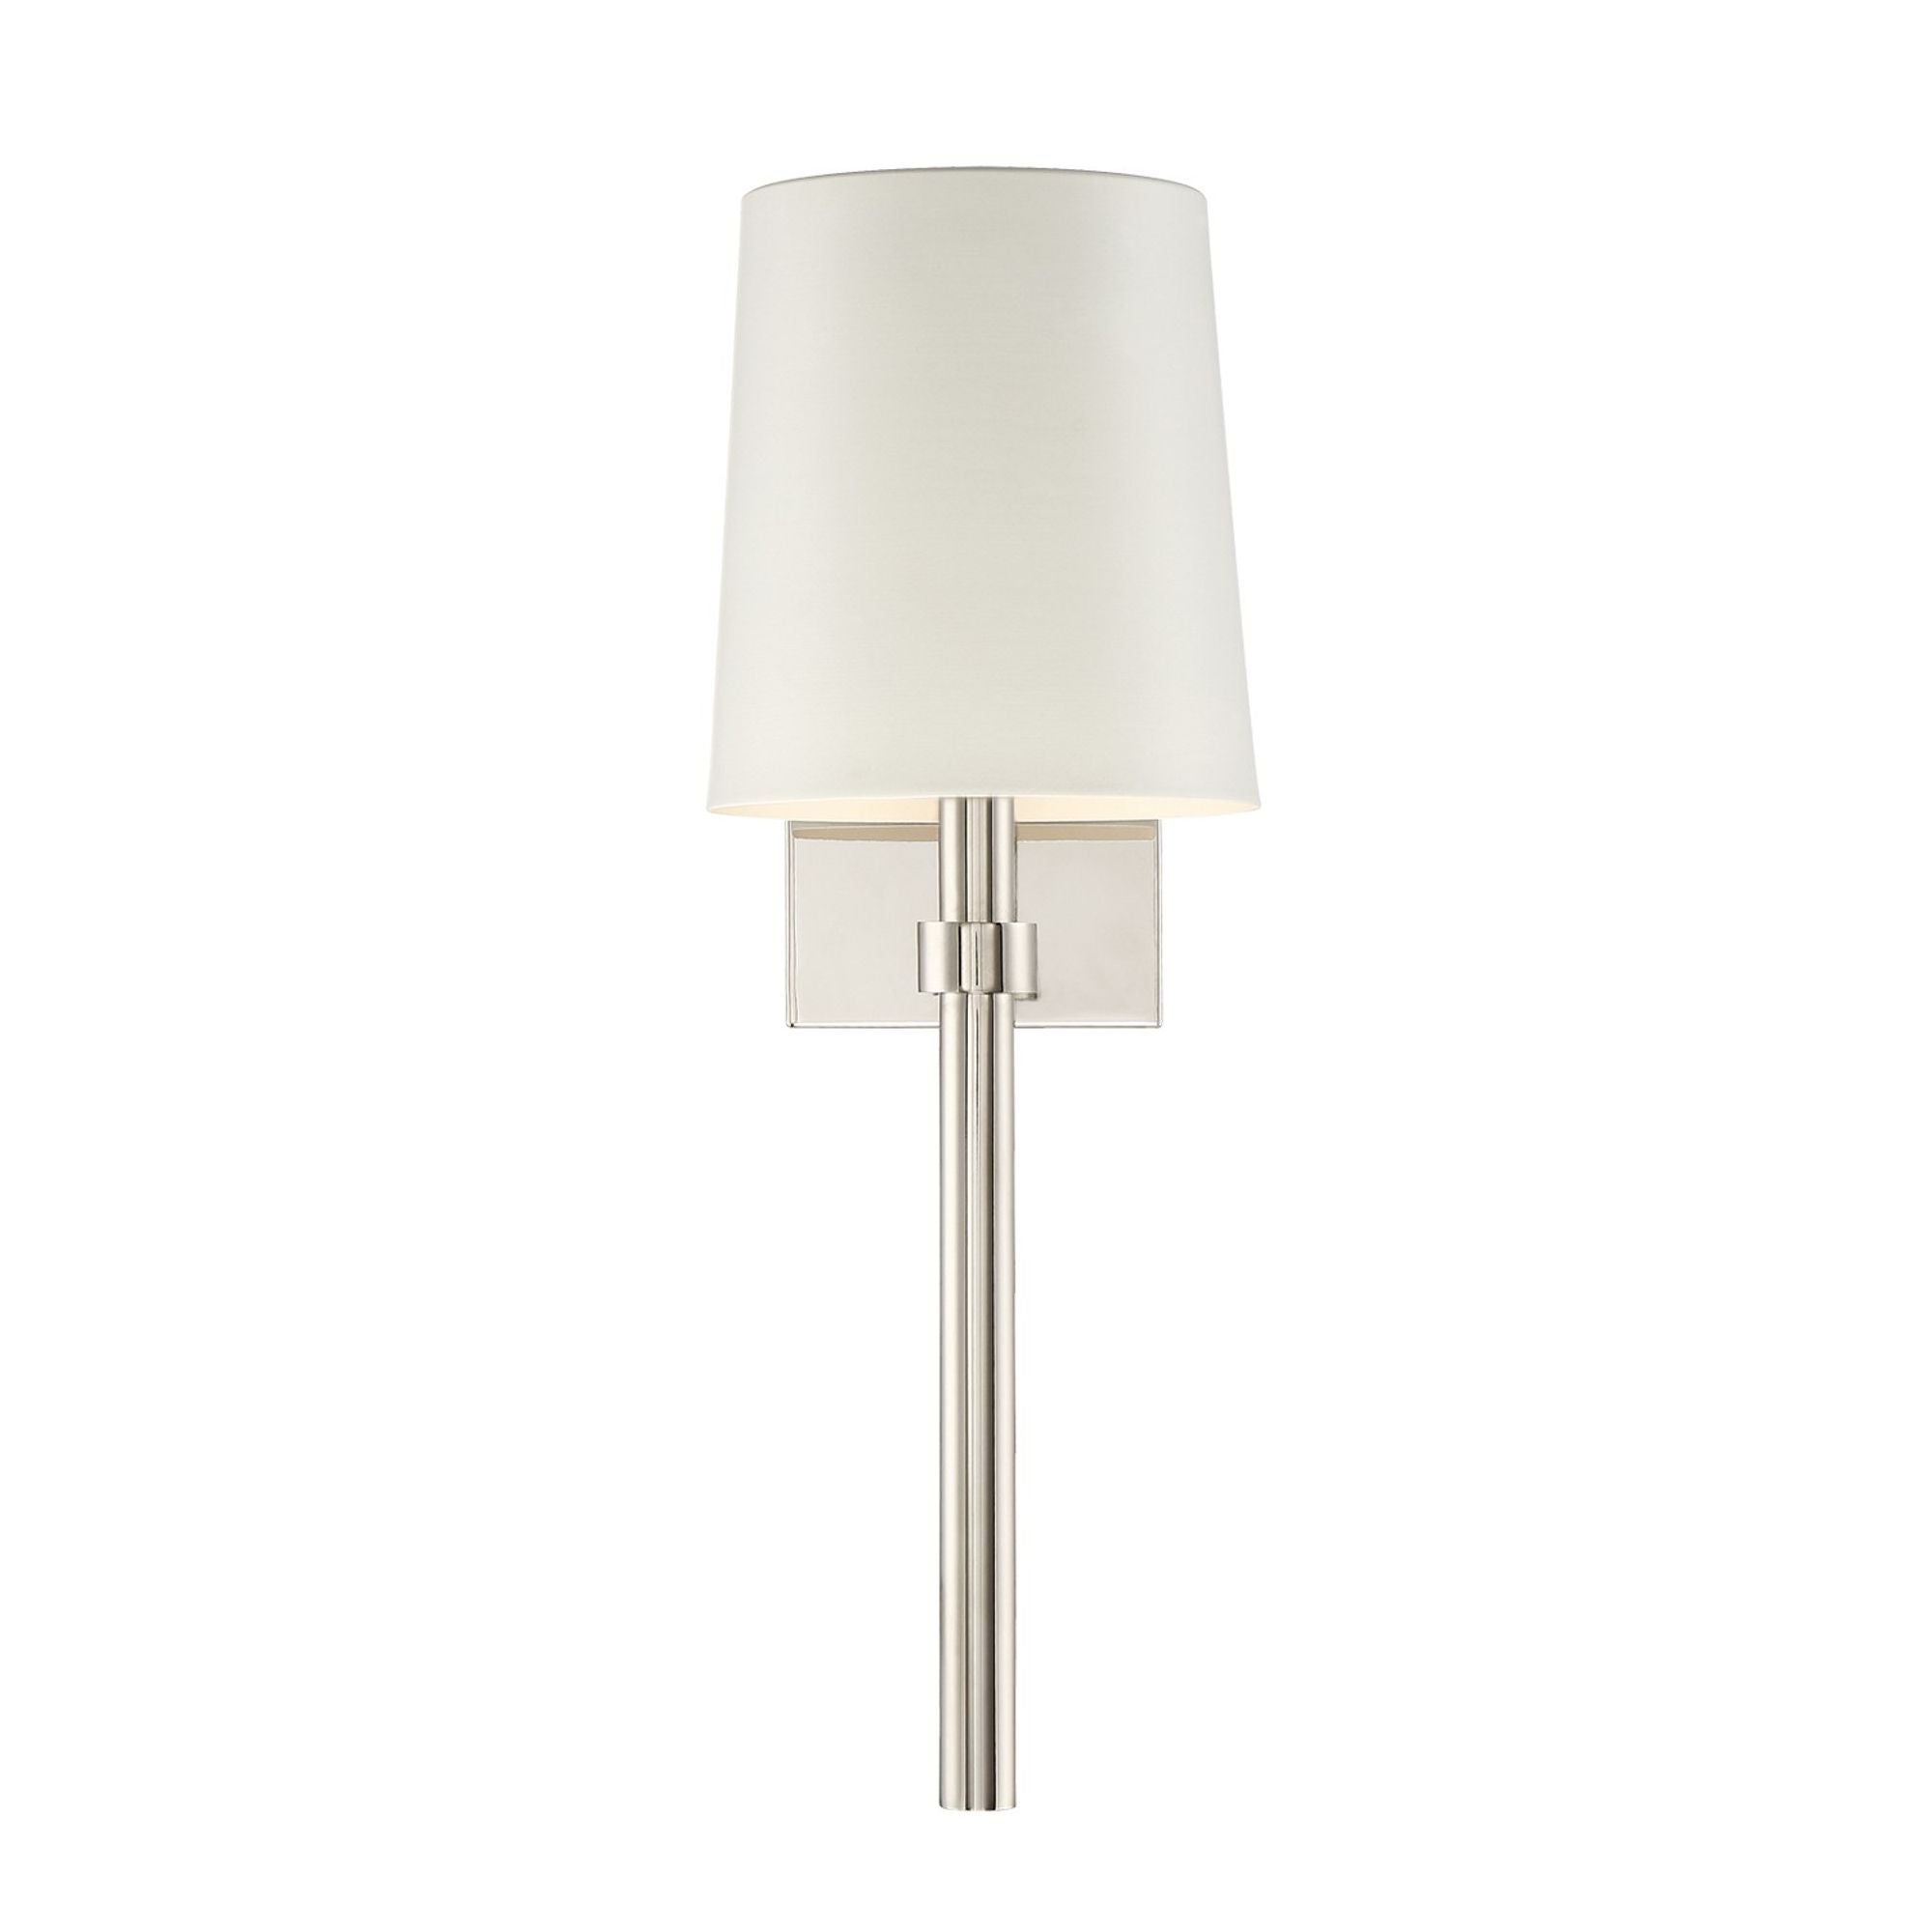 Bromley 1 Light Polished Nickel Wall Mount